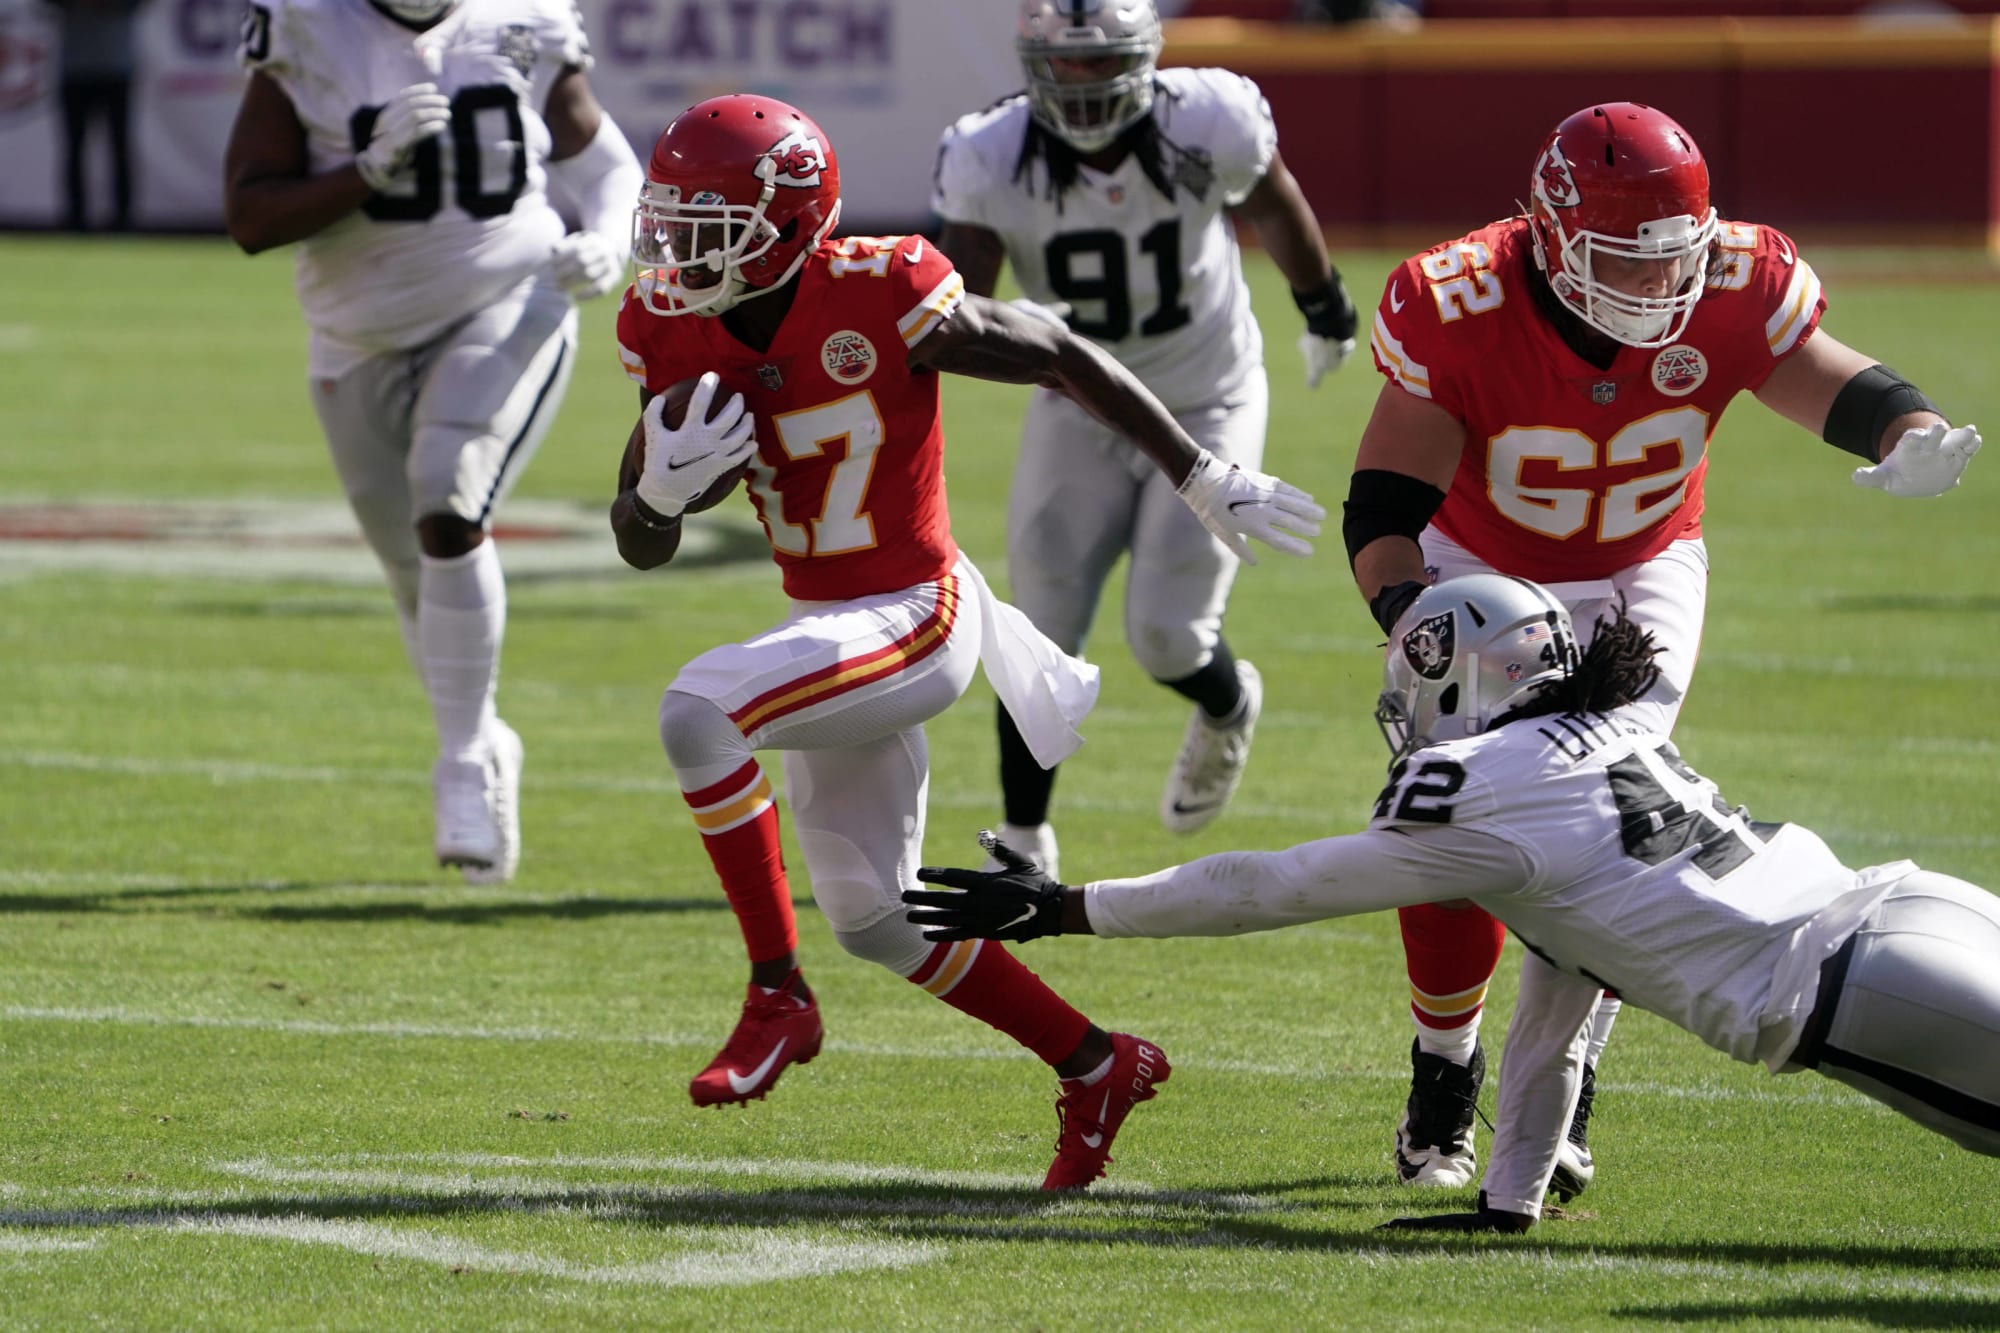 Kansas City Chiefs need more help from their other wide receivers